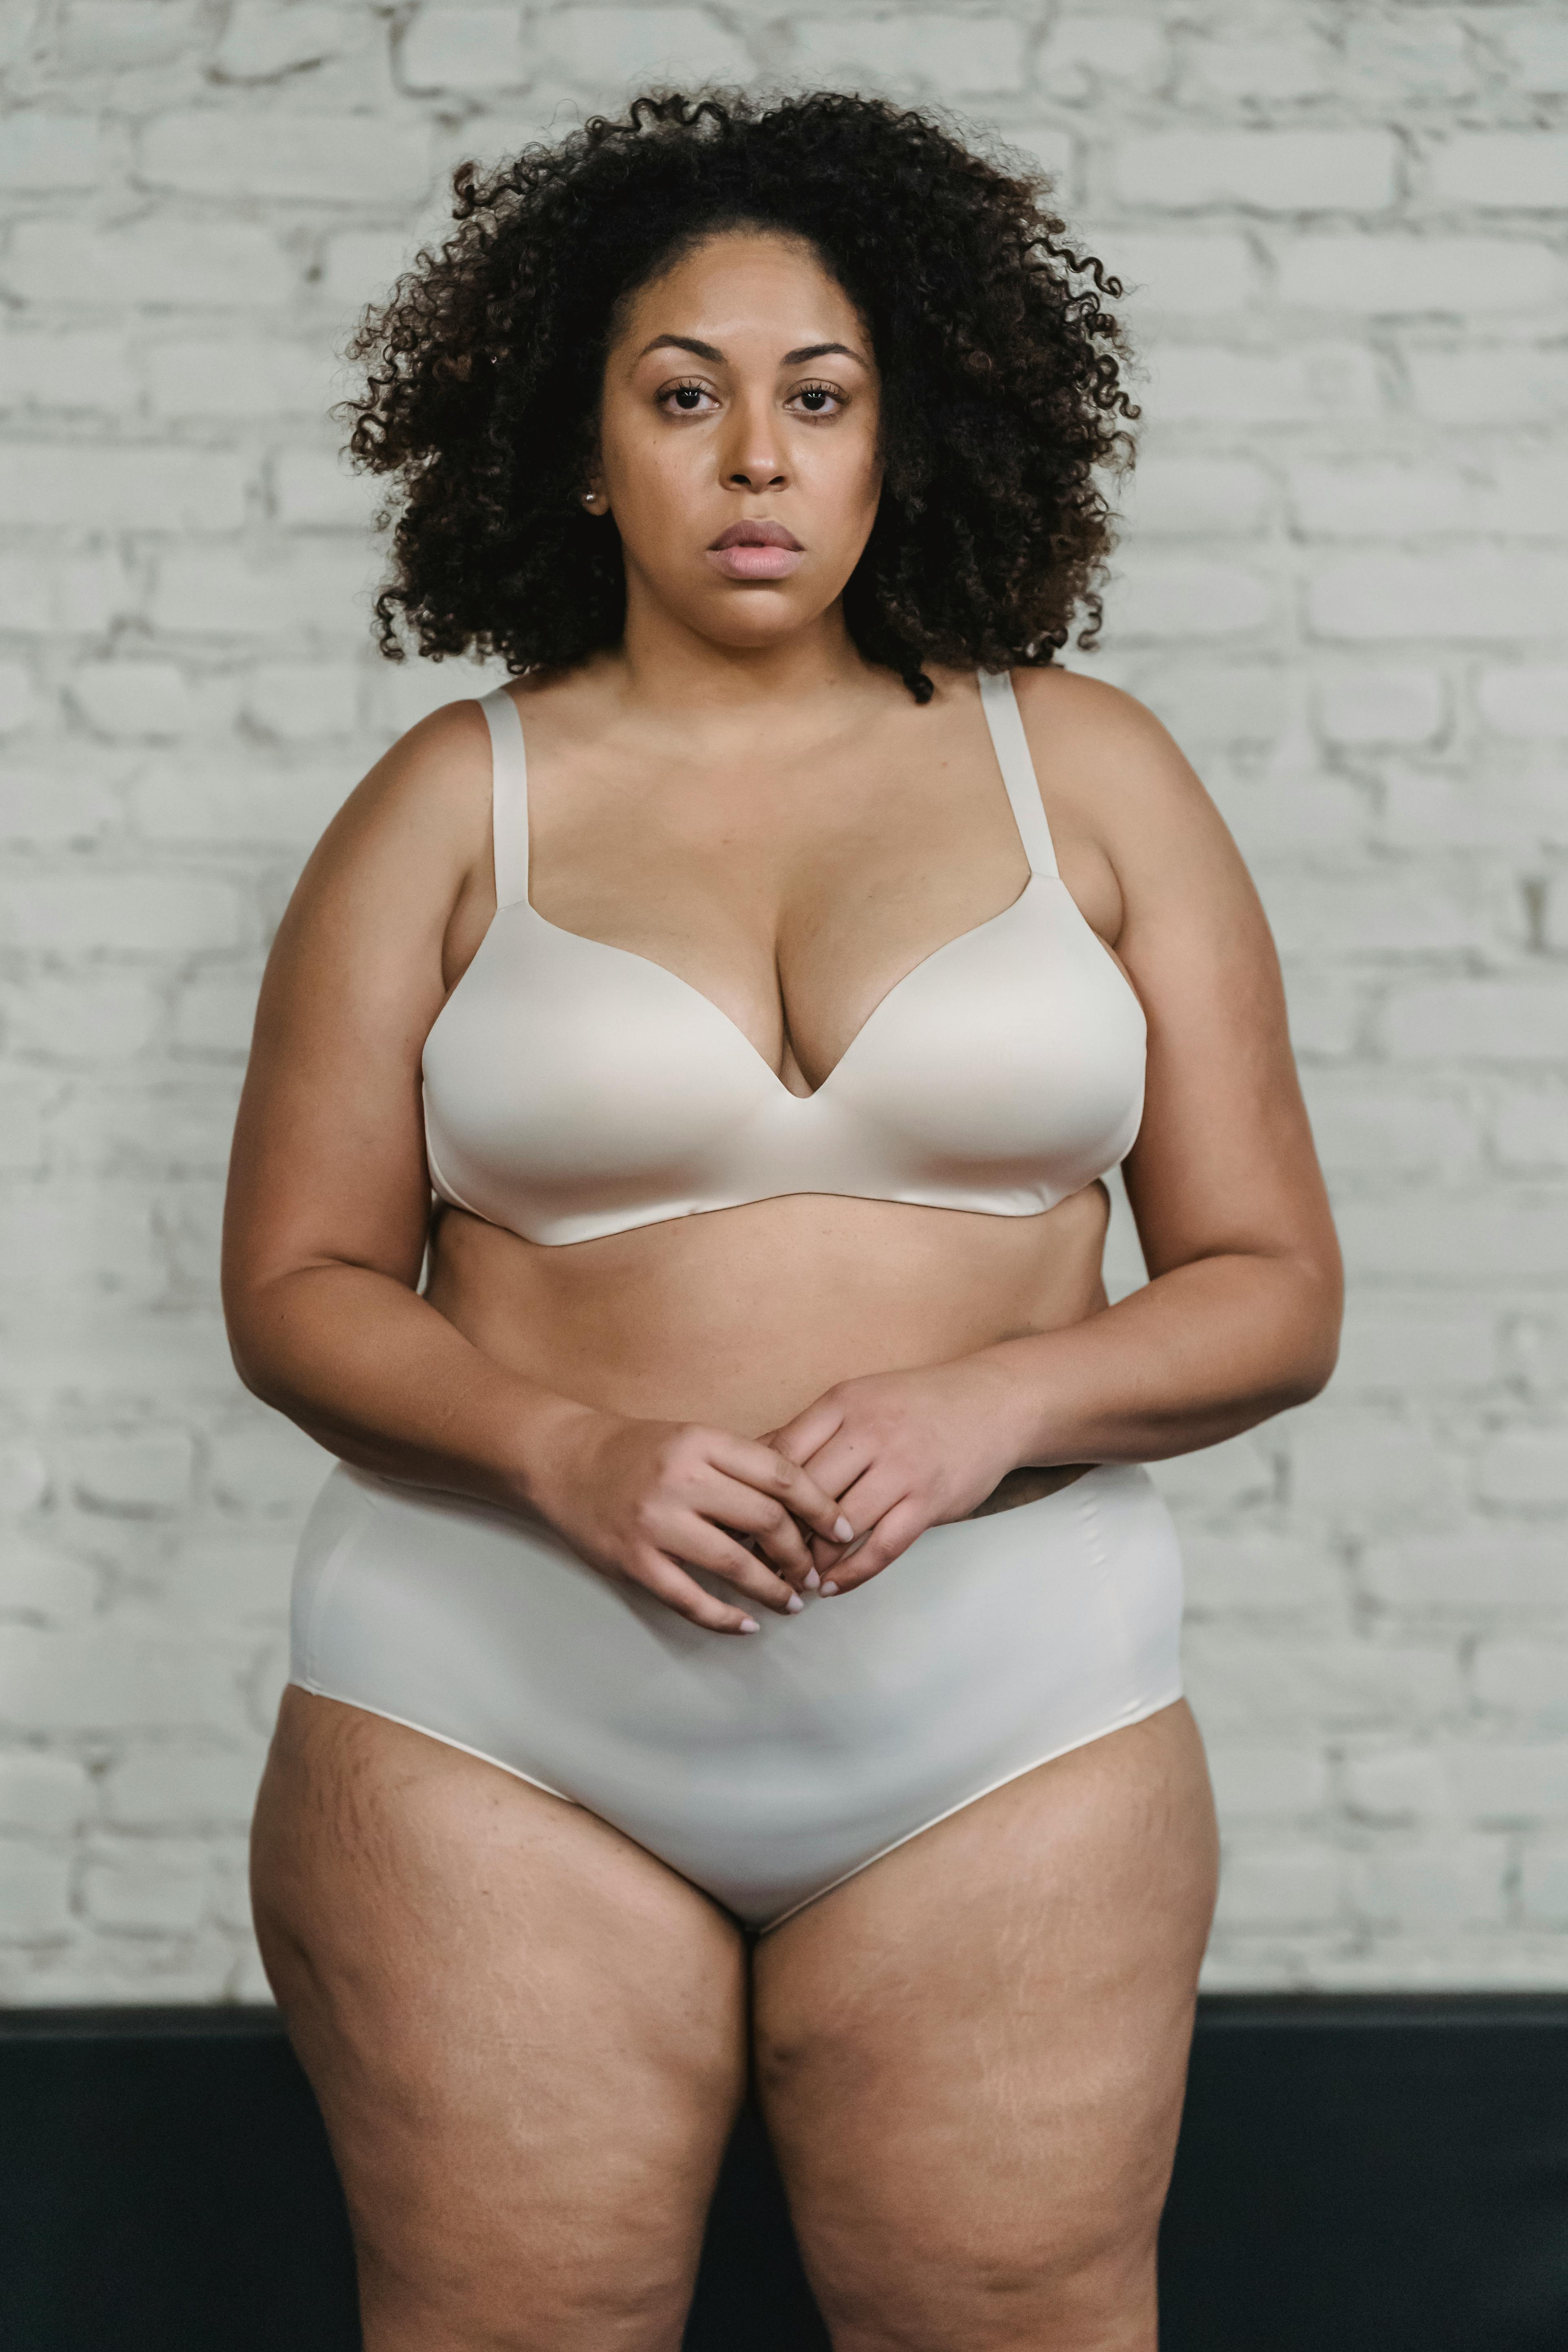 Healthy Waist Size May Differ for African American Women - Delight